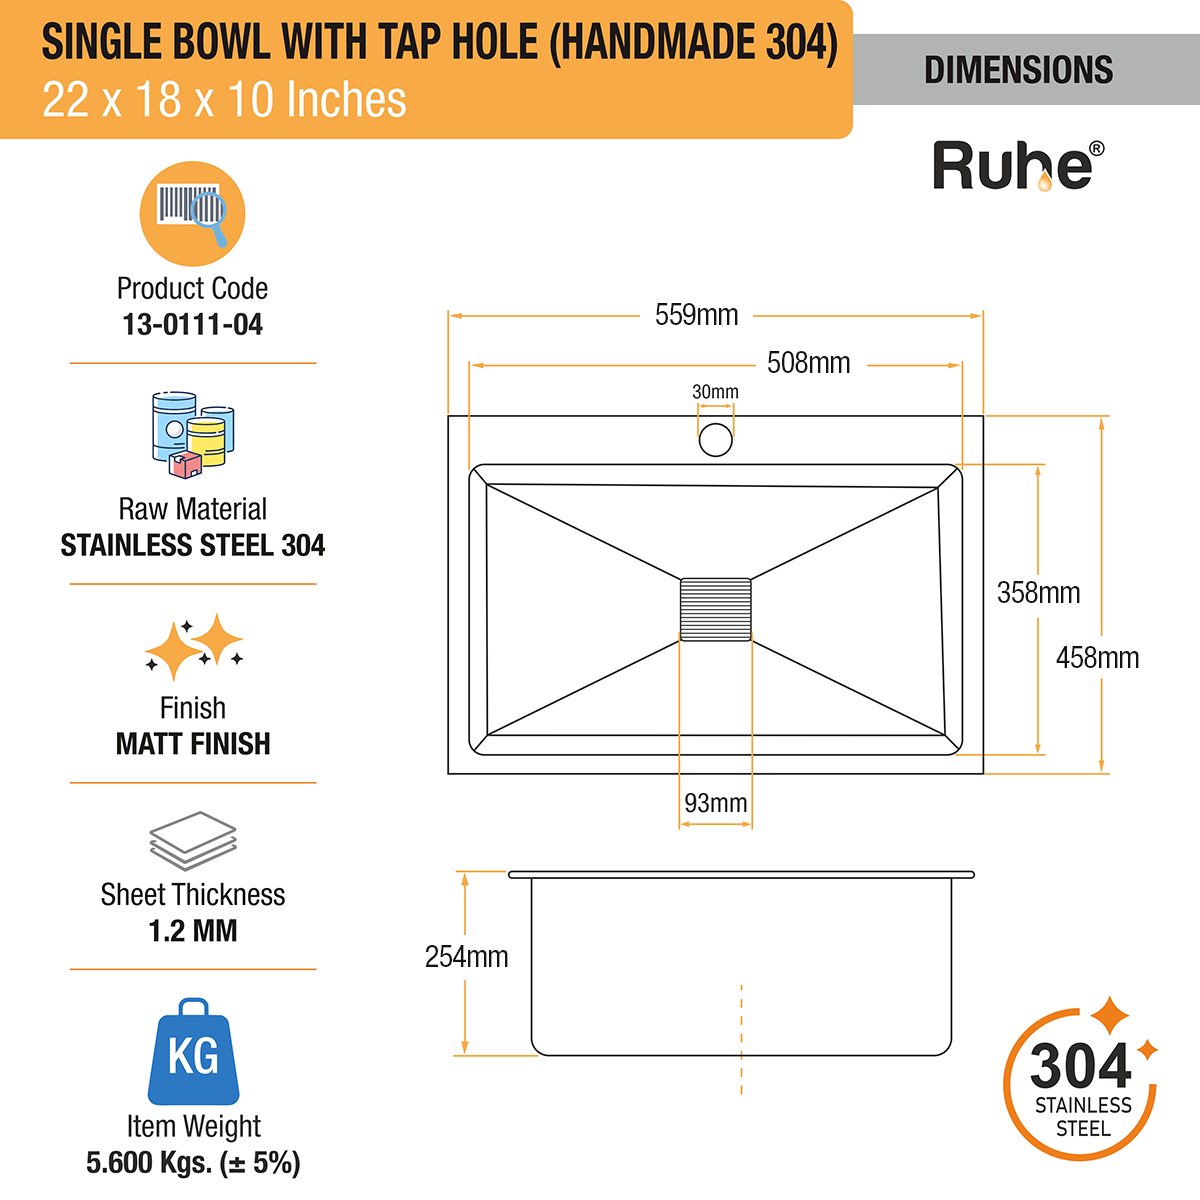 Handmade Single Bowl 304-Grade Kitchen Sink (22 x 18 x 10 Inches) with Tap Hole dimensions and sizes